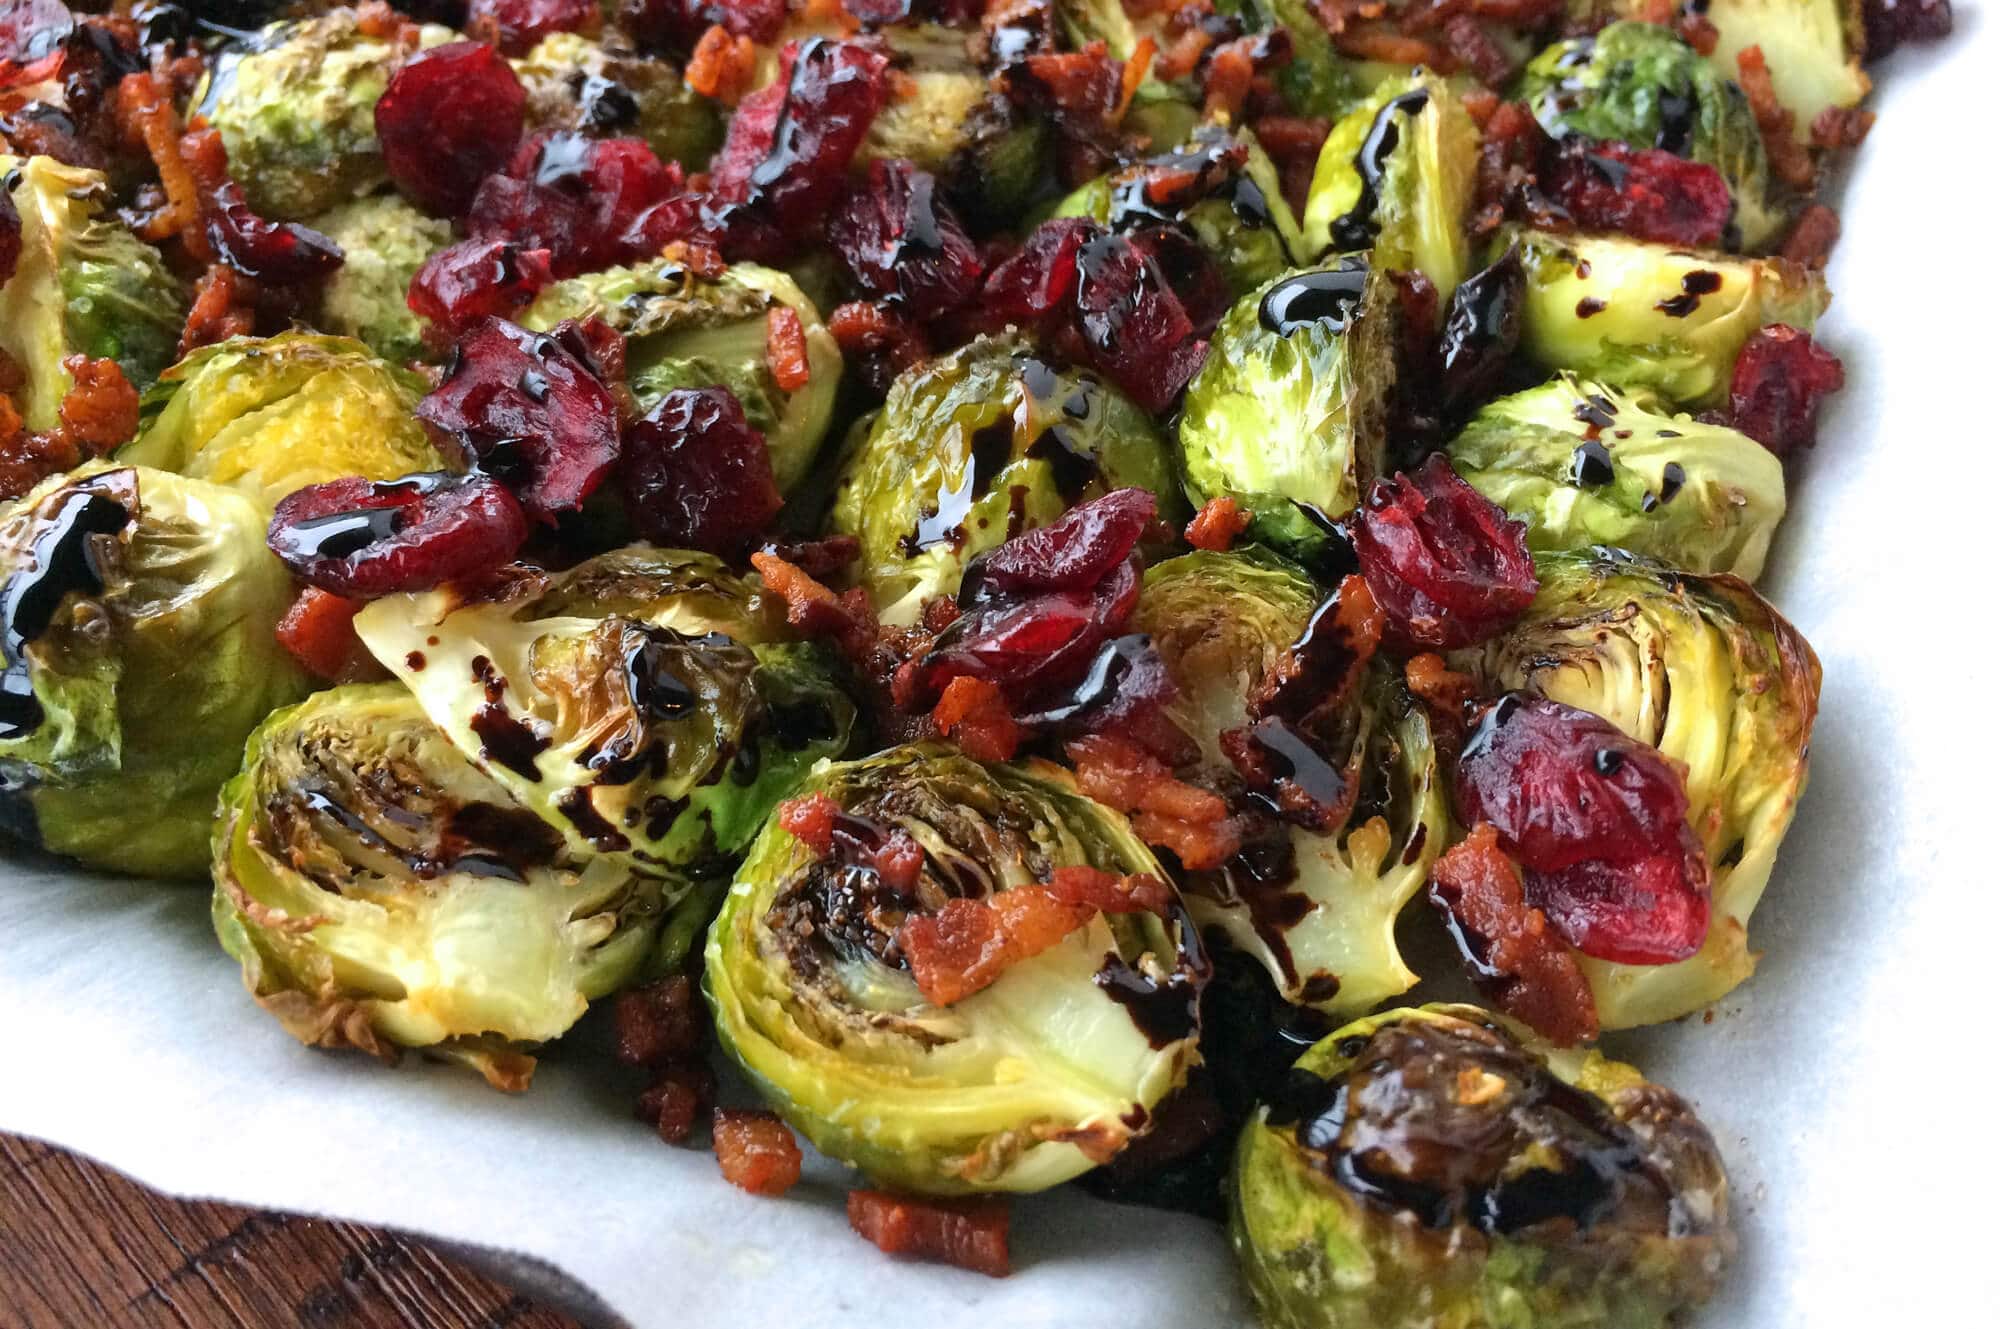 Bacon-Brown Sugar Brussels Sprouts